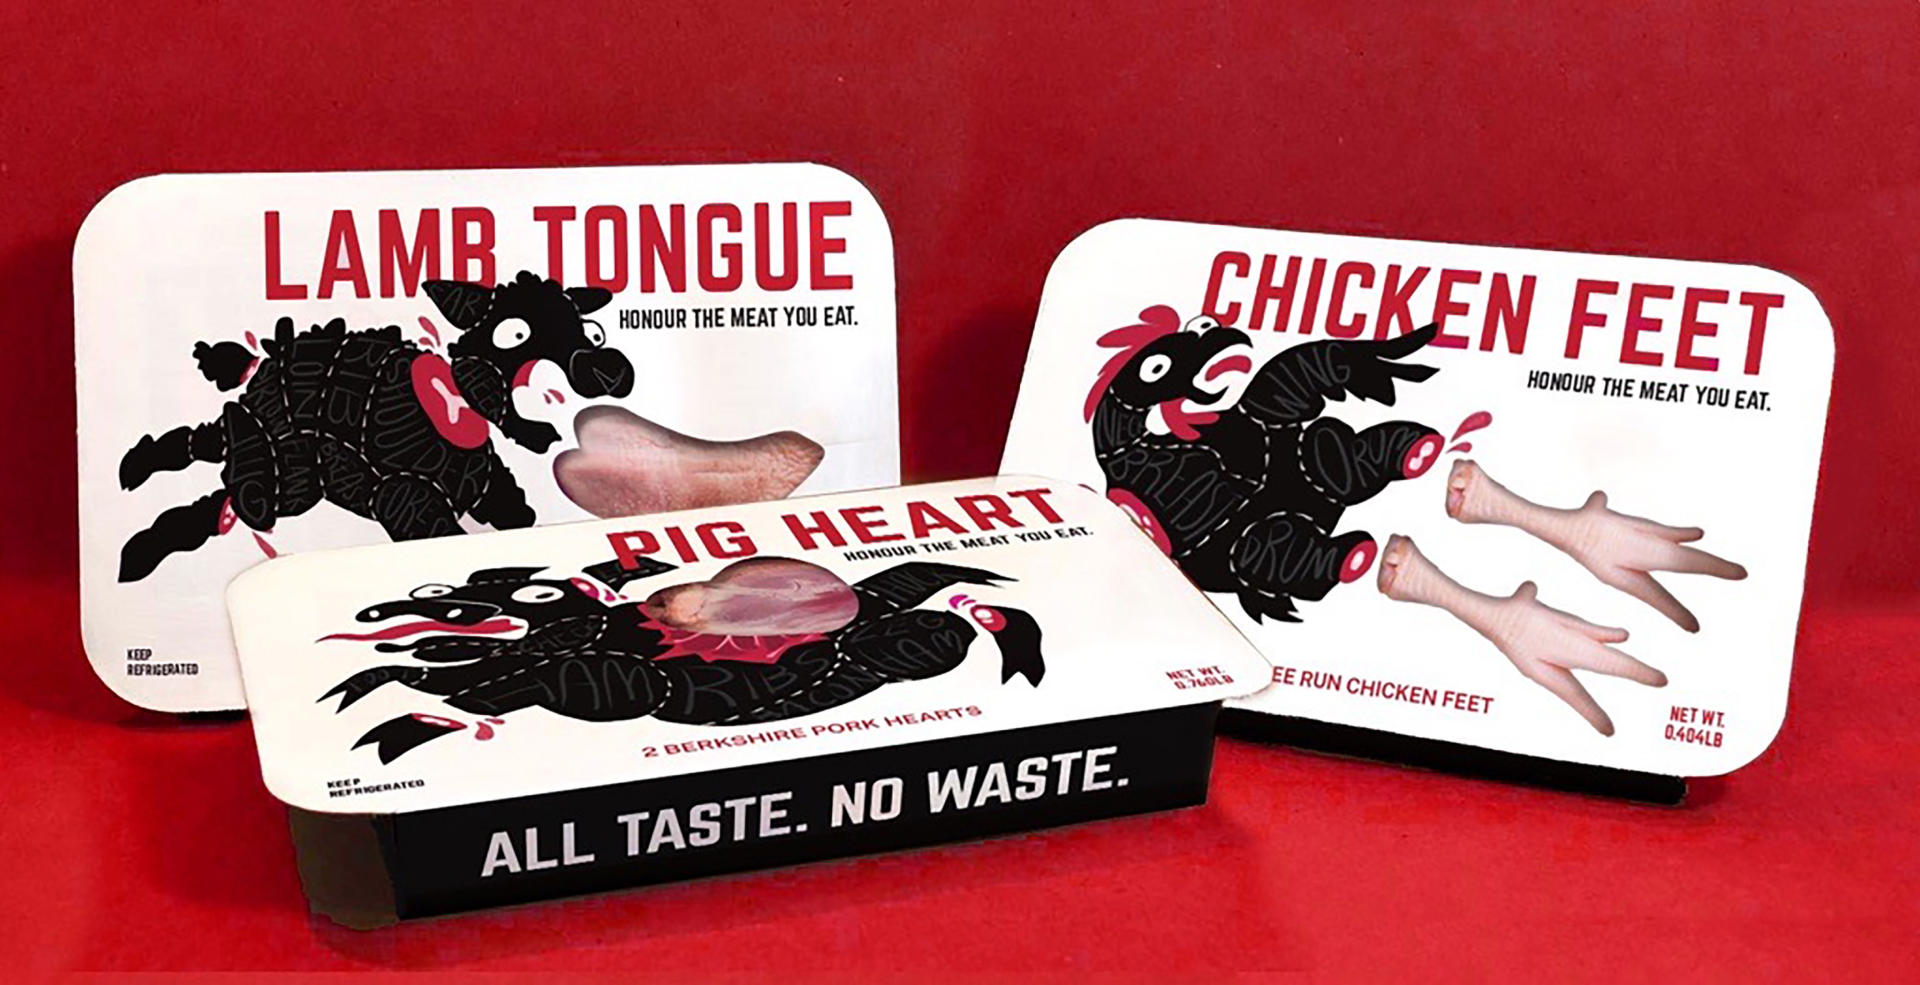 Three packaging sleeves for lamb tongue, pig heart and chicken feet.